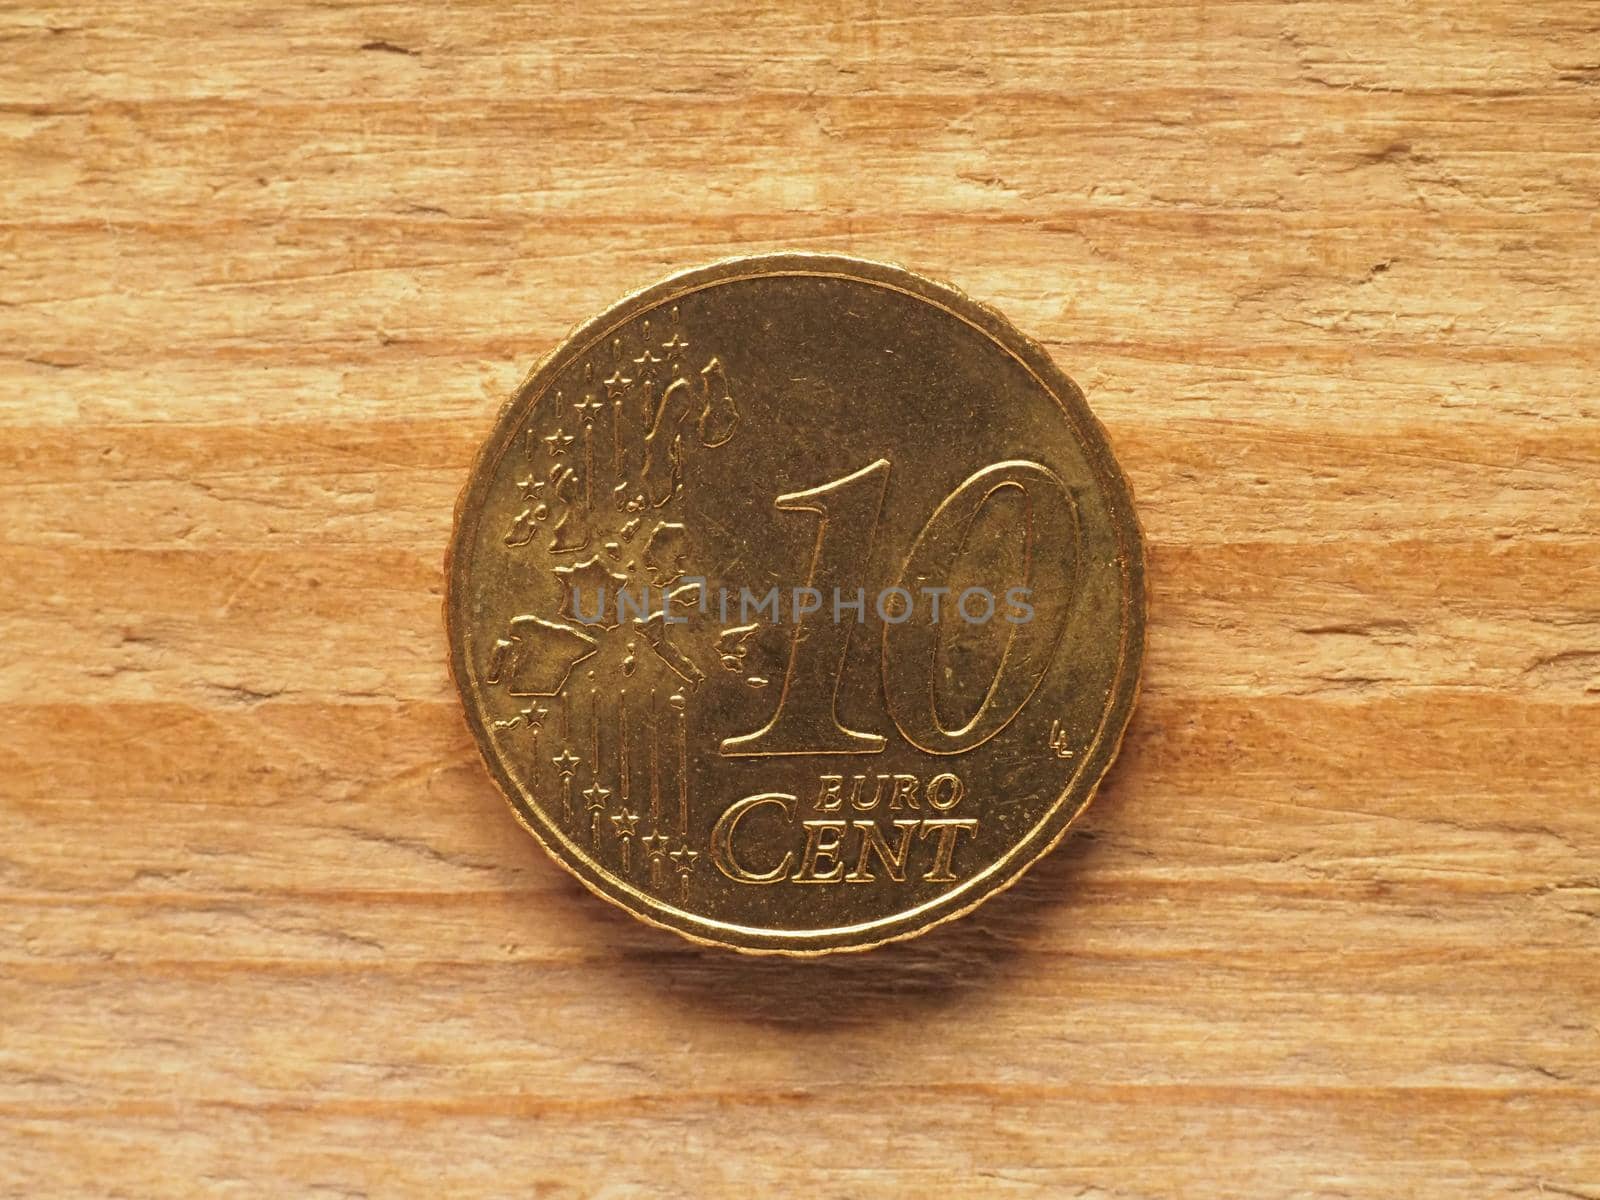 ten cent coin common side, currency of the European Union